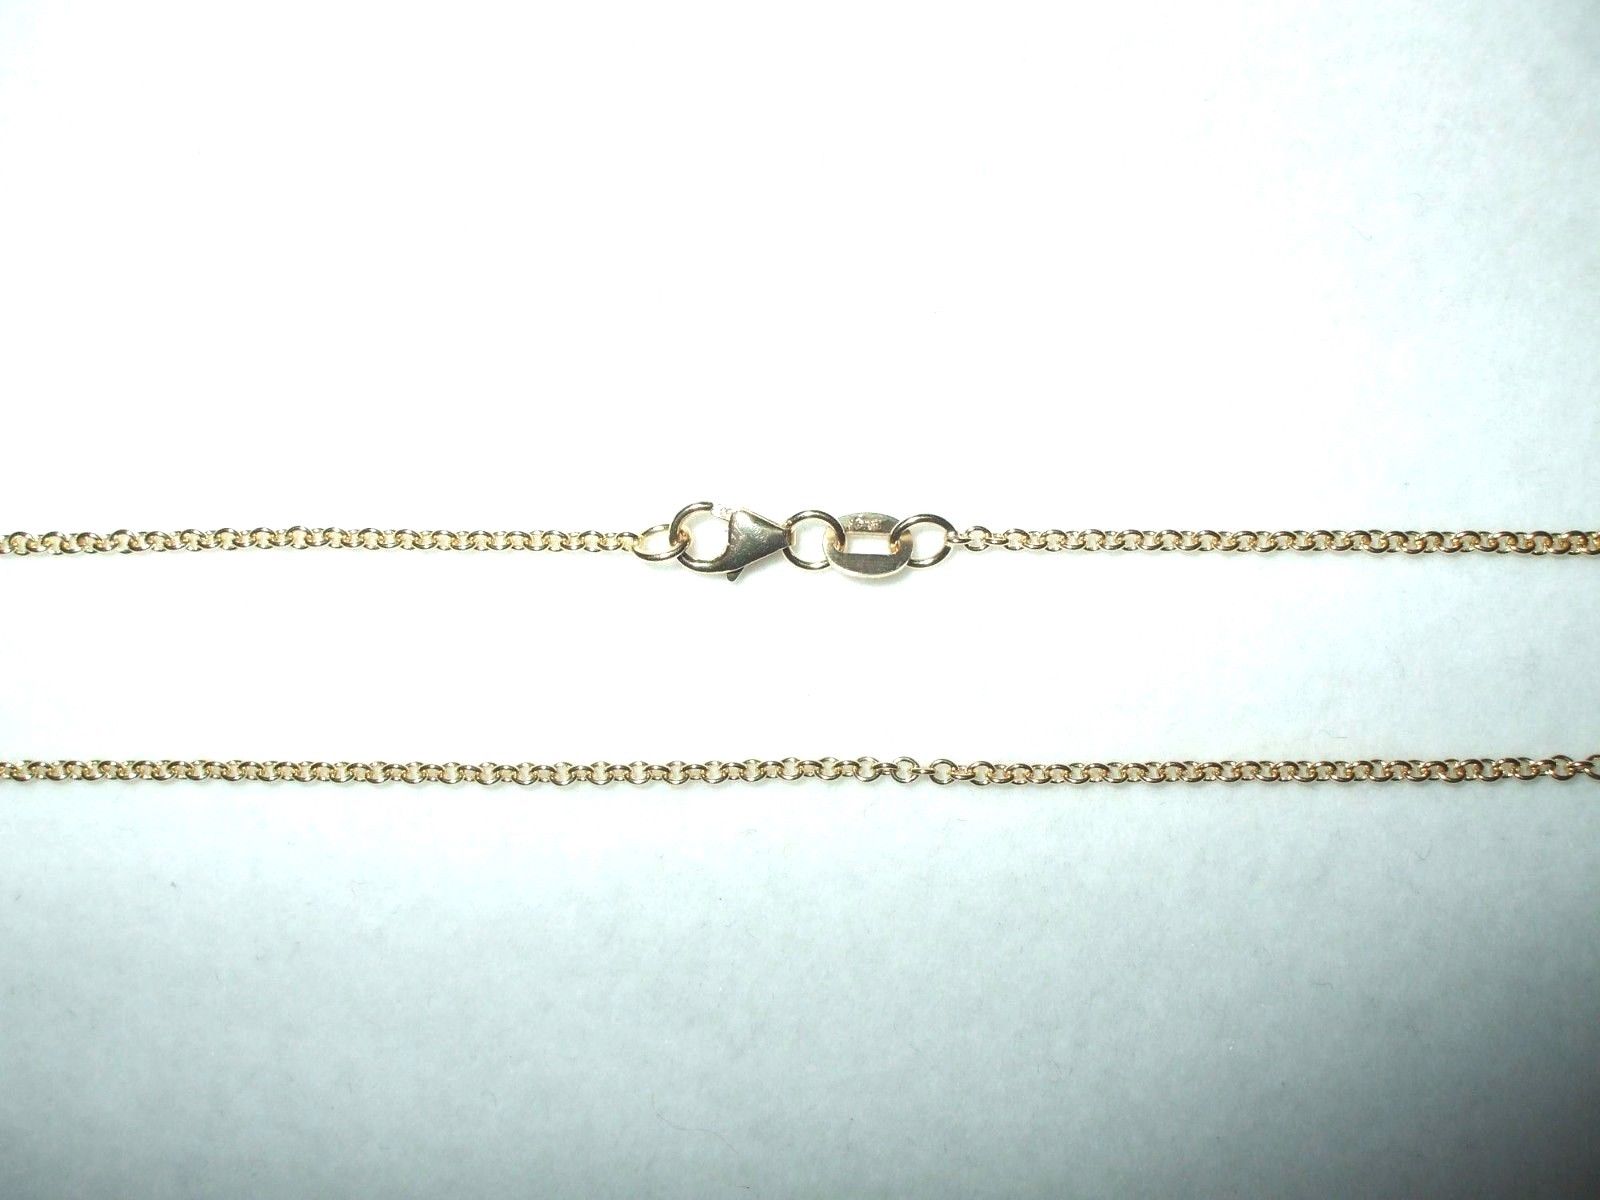 18 inch 14K yellow gold cable chain with lobster clasp 2.6 grams $350